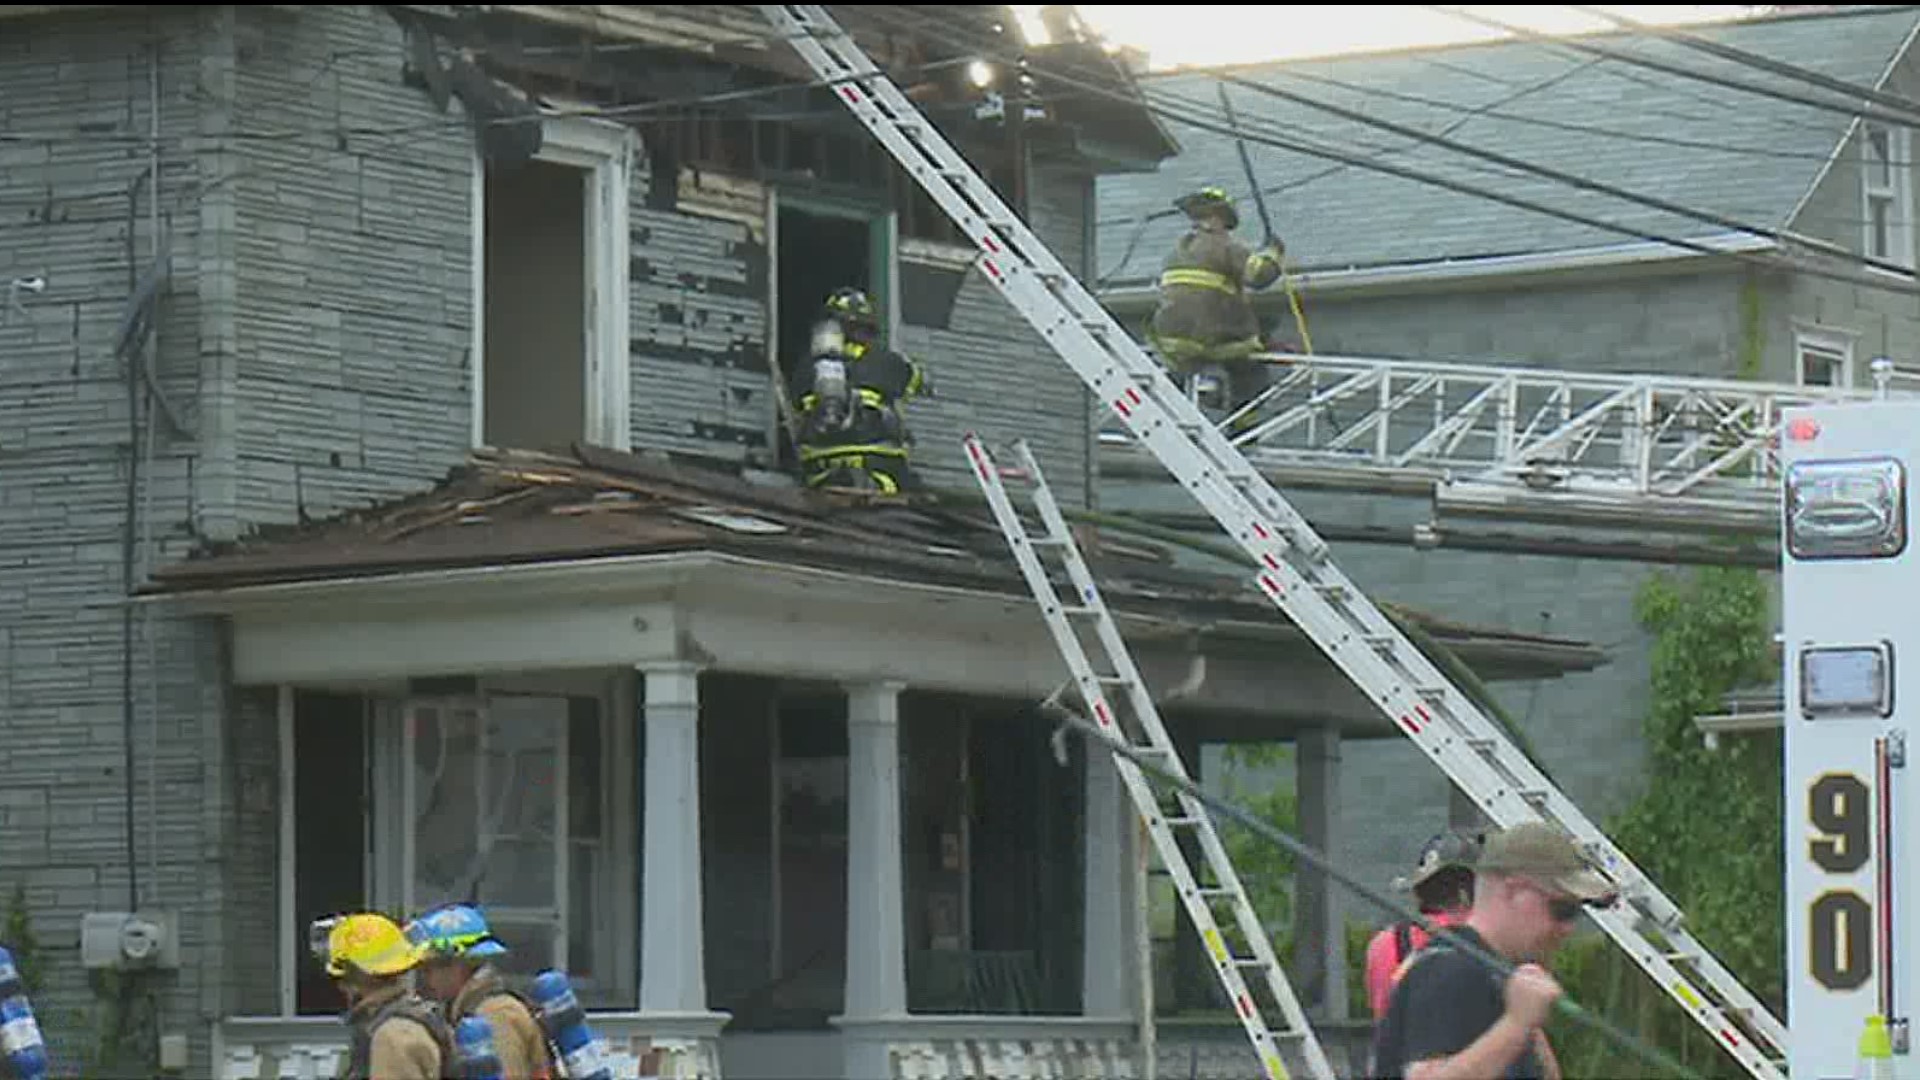 A firefighter was hurt while battling flames at a home in Northumberland County Saturday.